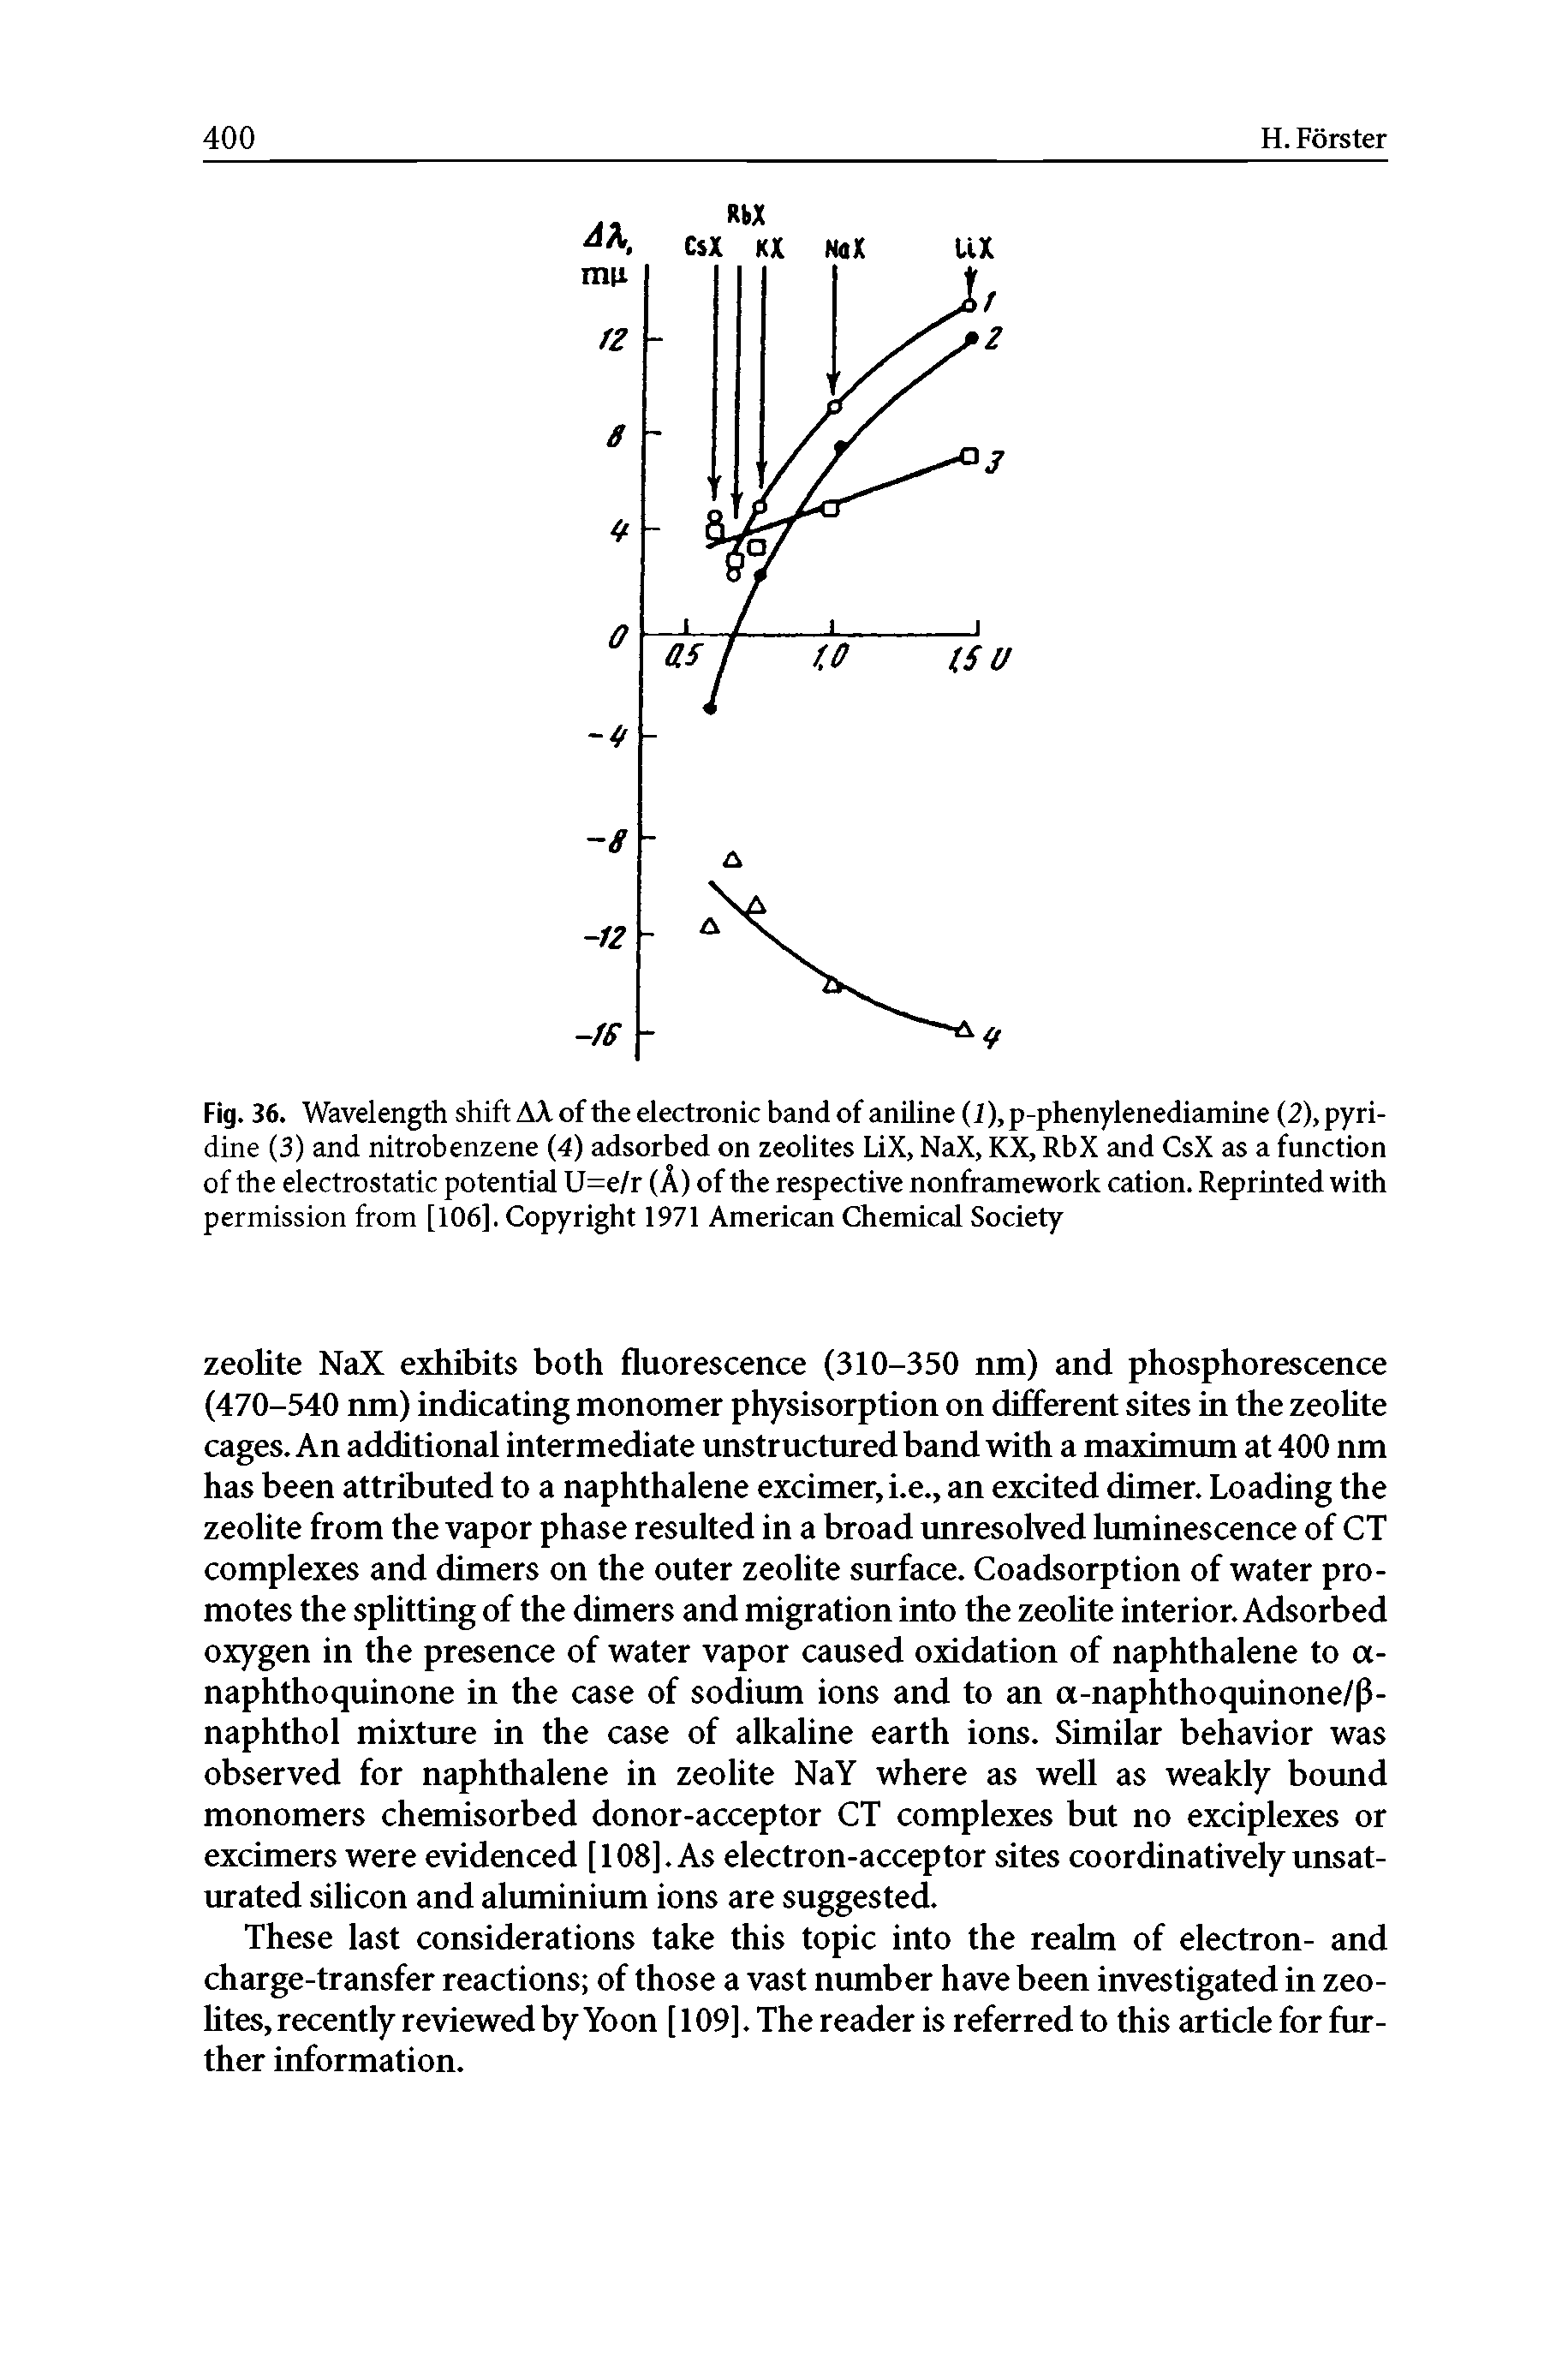 Fig. 36. Wavelength shift AA. of the electronic band of aniline (1), p-phenylenediamine (2), pyridine (3) and nitrobenzene (4) adsorbed on zeolites UX, NaX, KX, RbX and CsX as a function of the electrostatic potential U=e/r (A) of the respective nonframework cation. Reprinted with permission from [106], Copyright 1971 American Chemical Society...